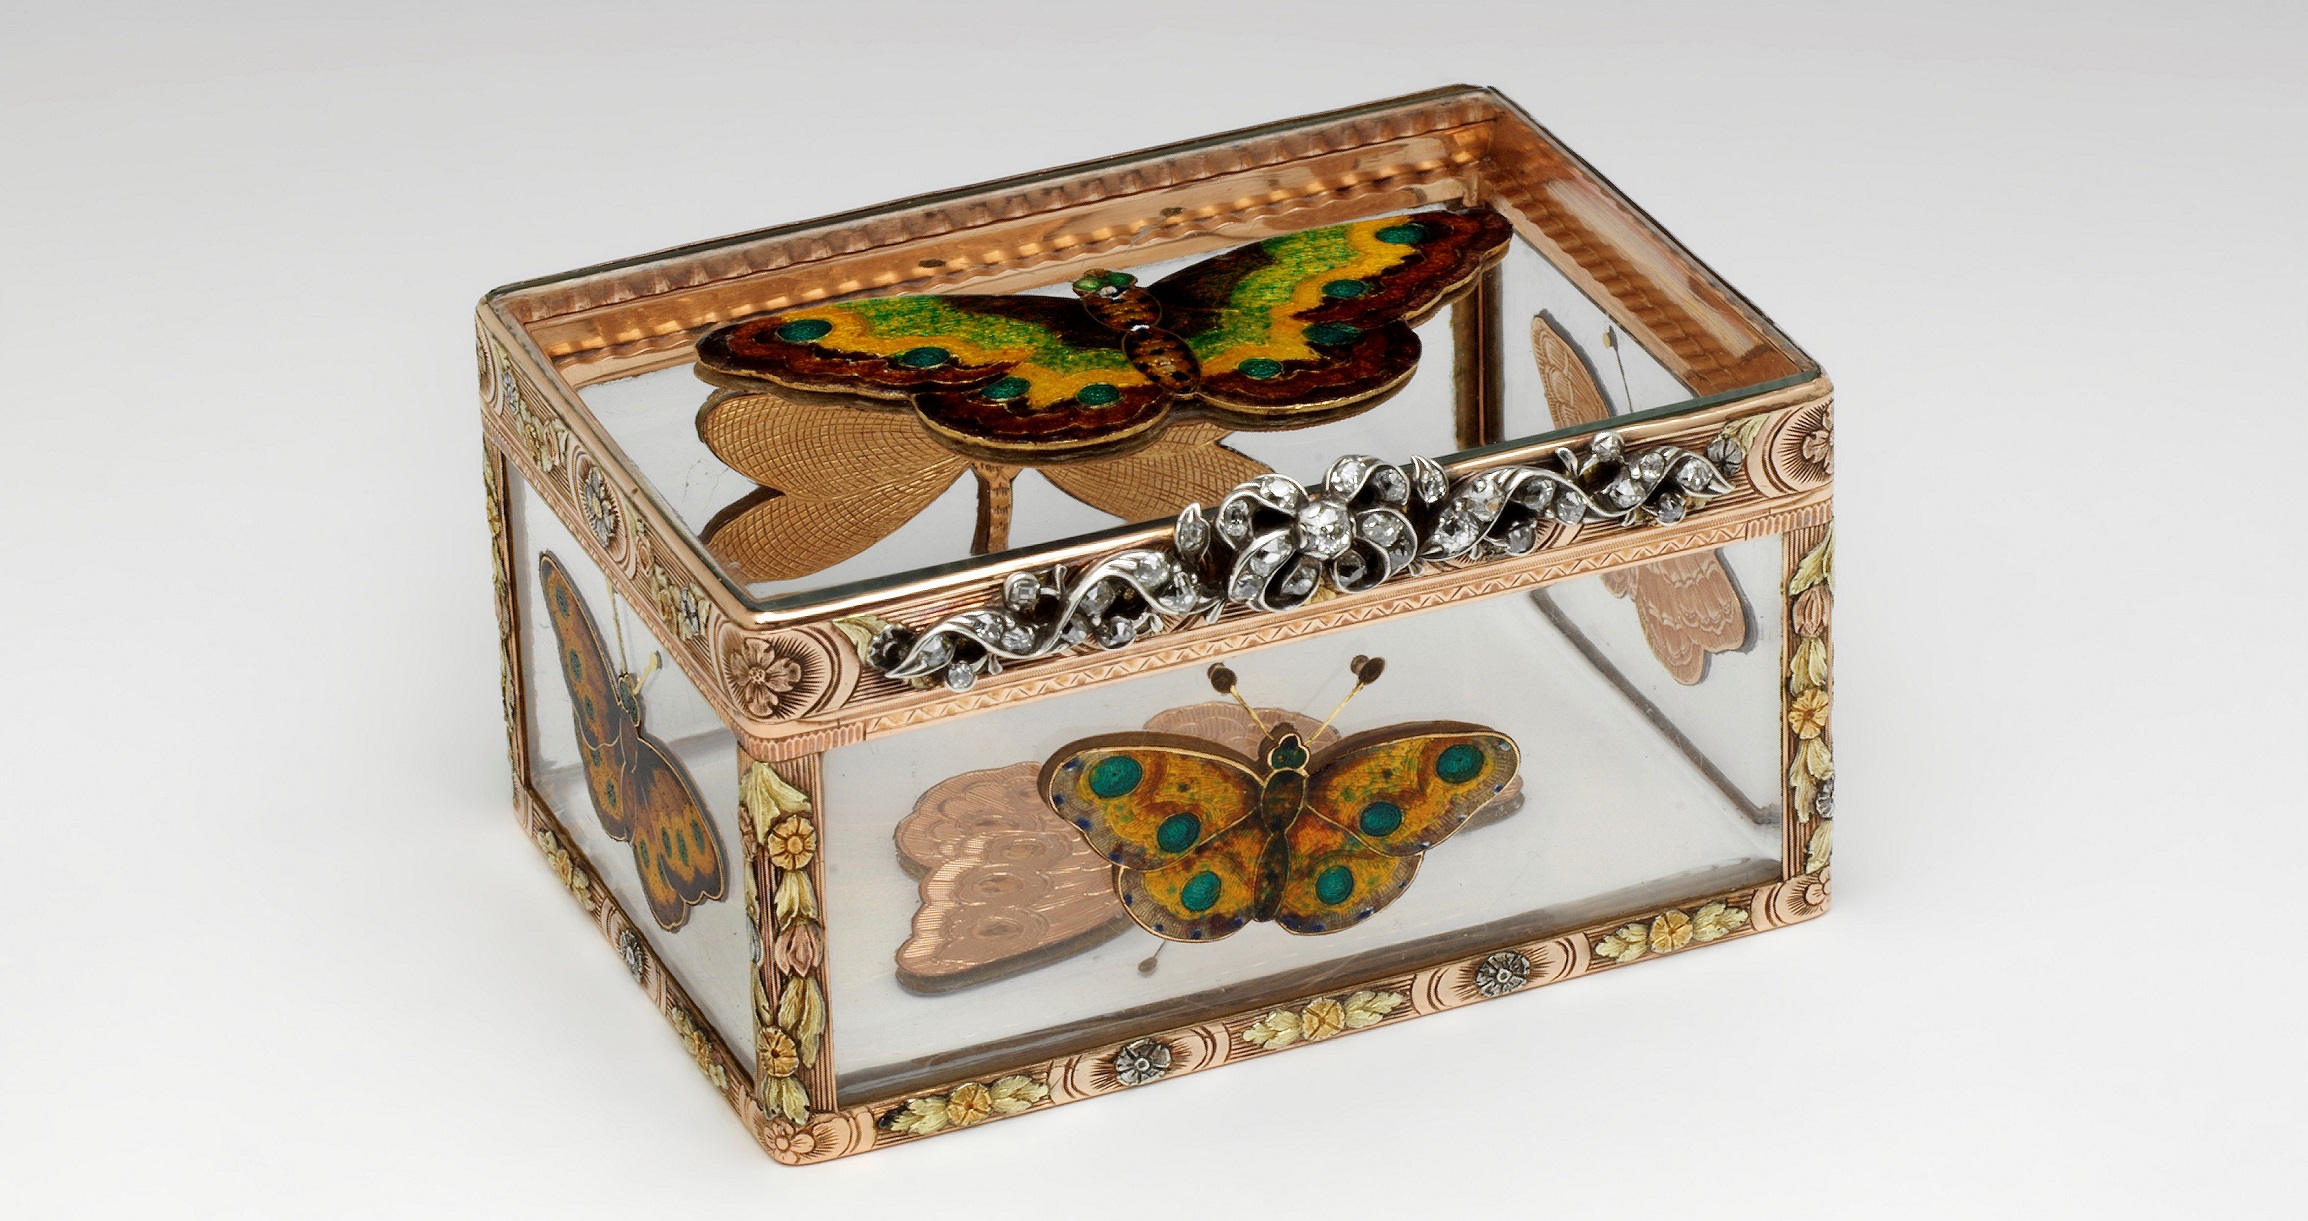 A gold and rock crystal snuffbox, with enamel butterflies